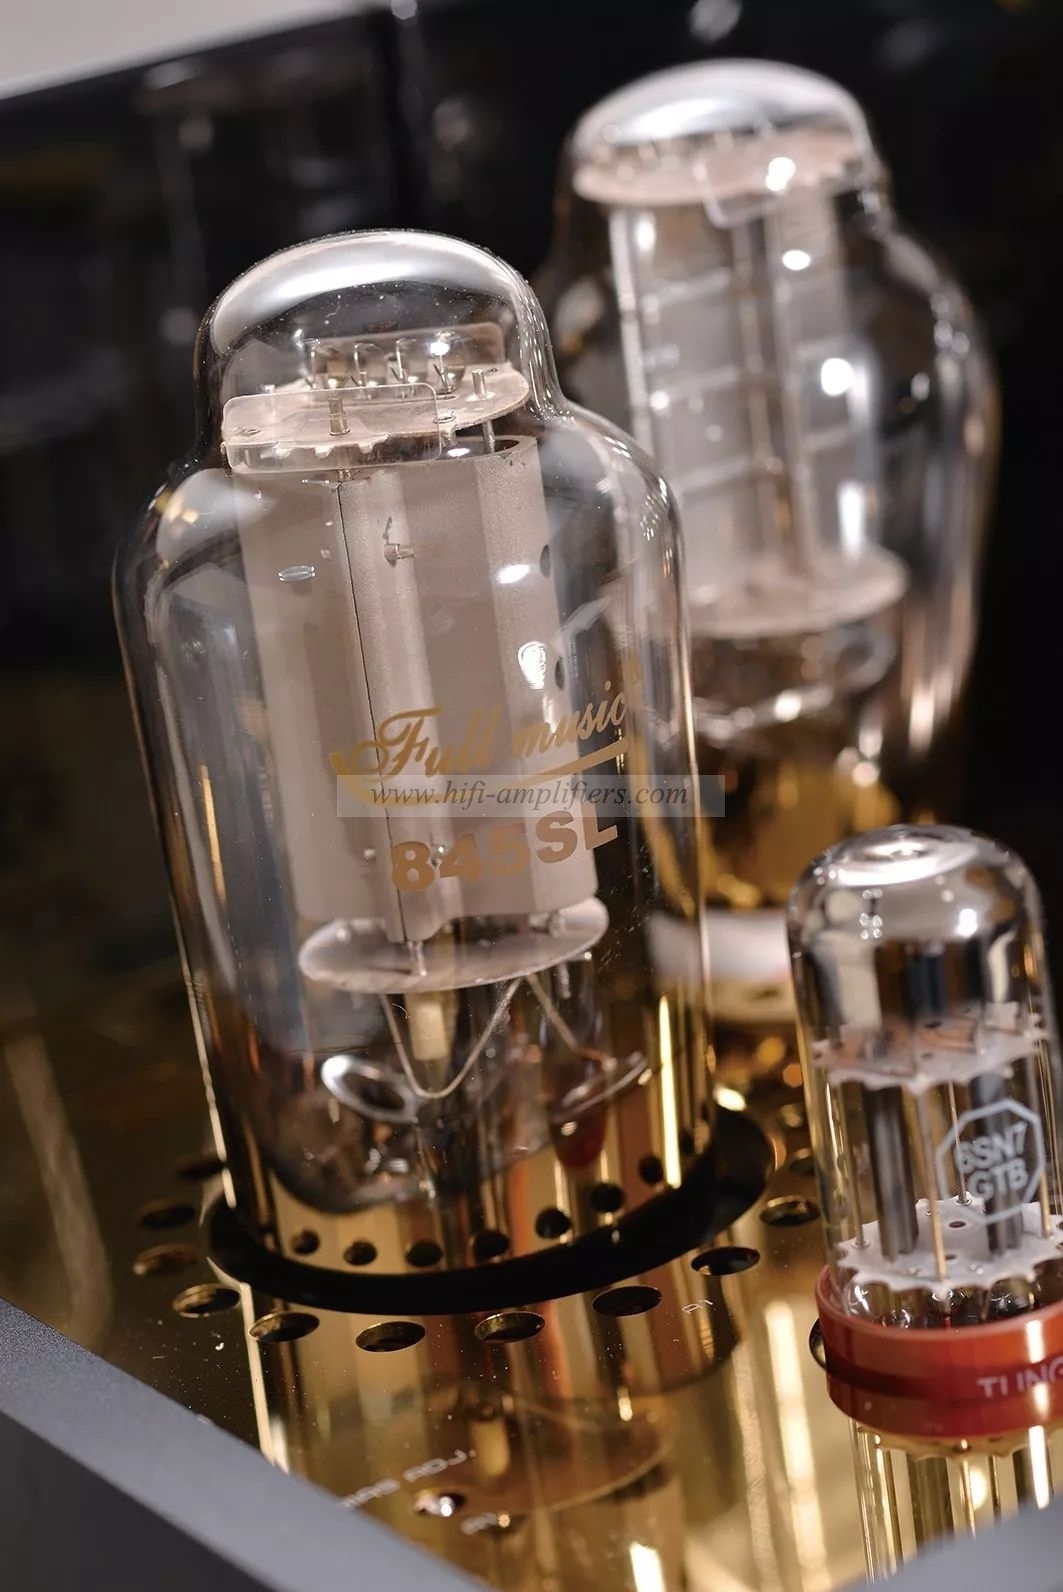 Cayin A-845Pro Vacuum Tube Integrated Amplifier AMP 300 845 Single-ended Class A 25W*2 25th Global Limited Sale